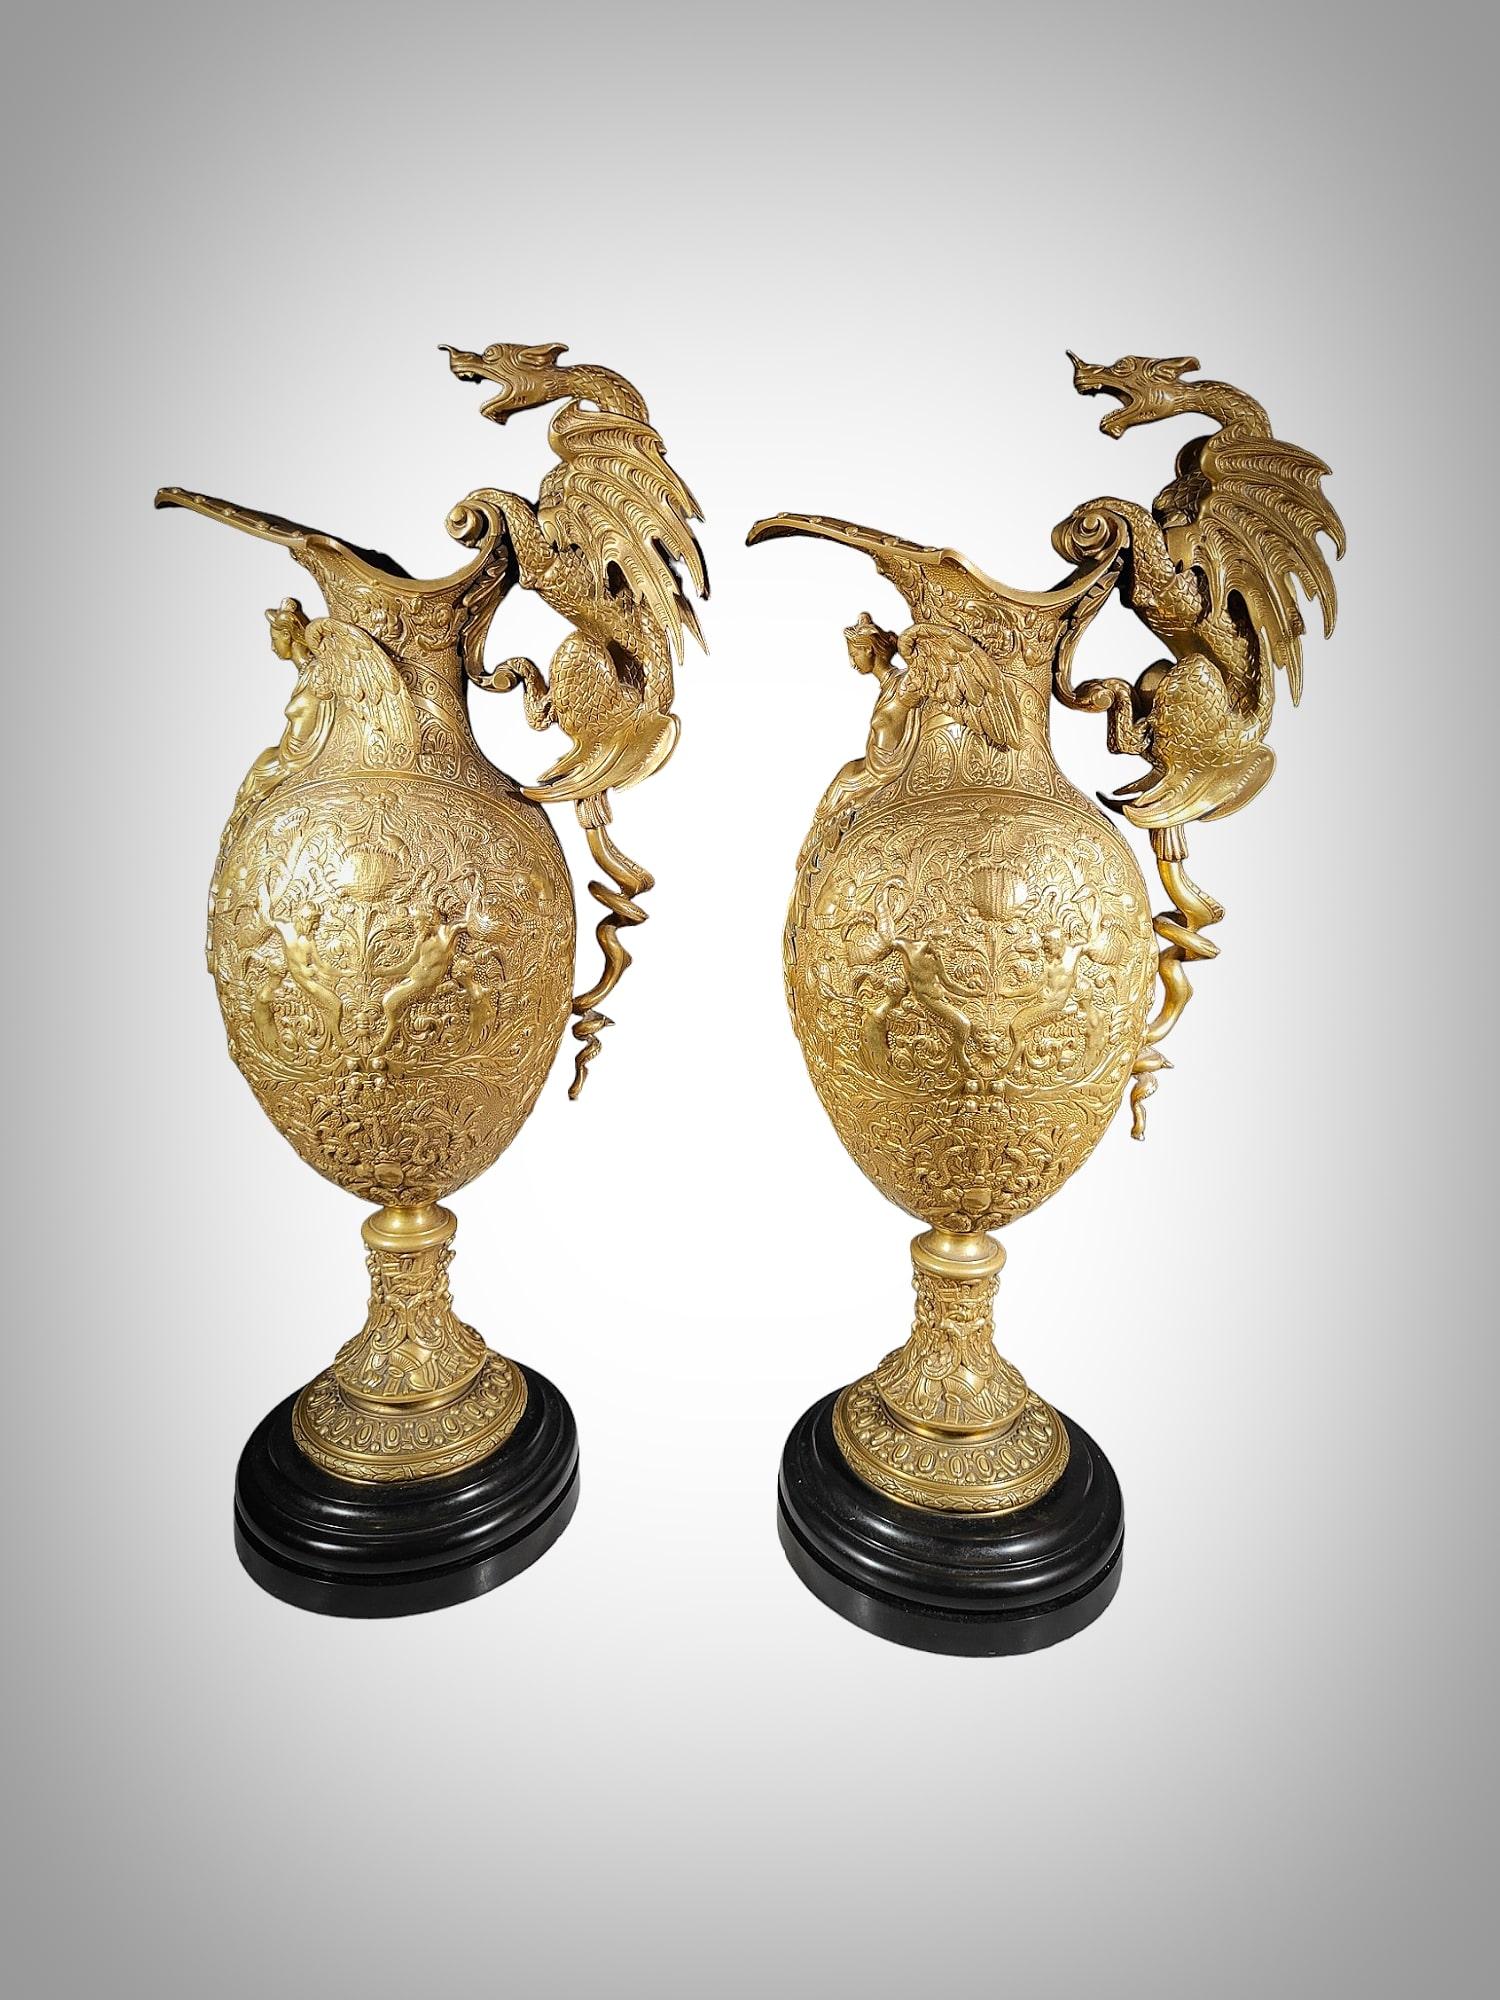 Magnificent Gilded Bronze Vases from the 19th Century For Sale 12